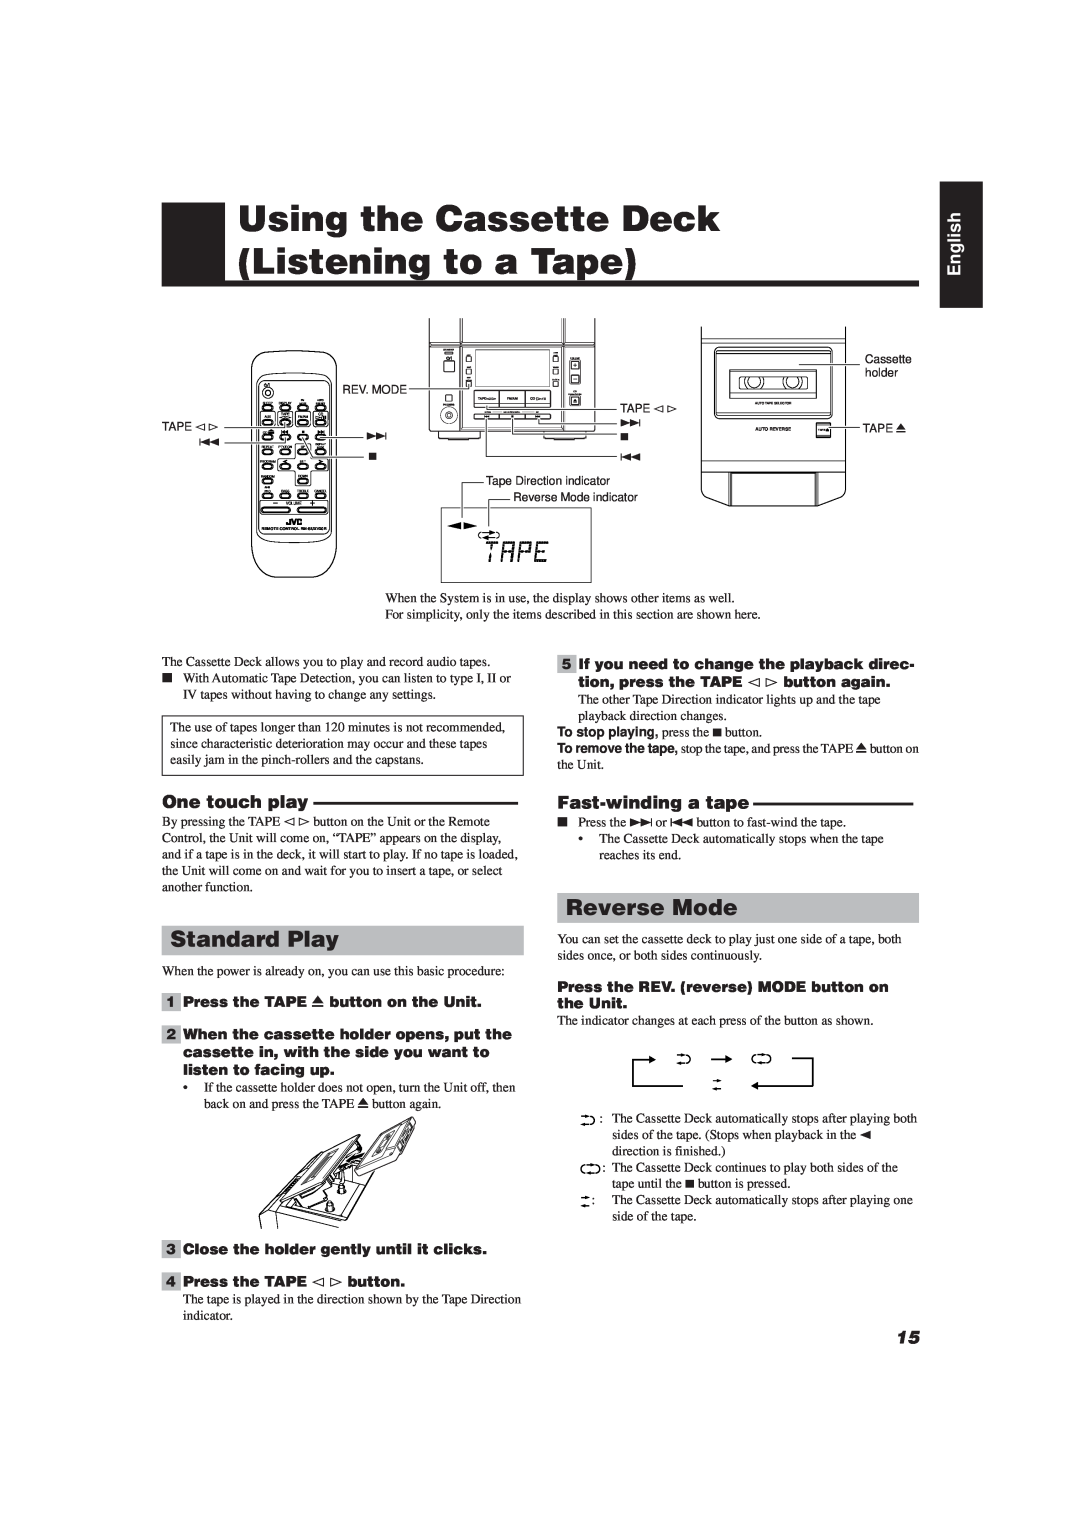 JVC UX-V20R/UX-V10 manual Using the Cassette Deck Listening to a Tape, Standard Play, Reverse Mode, One touch play, English 